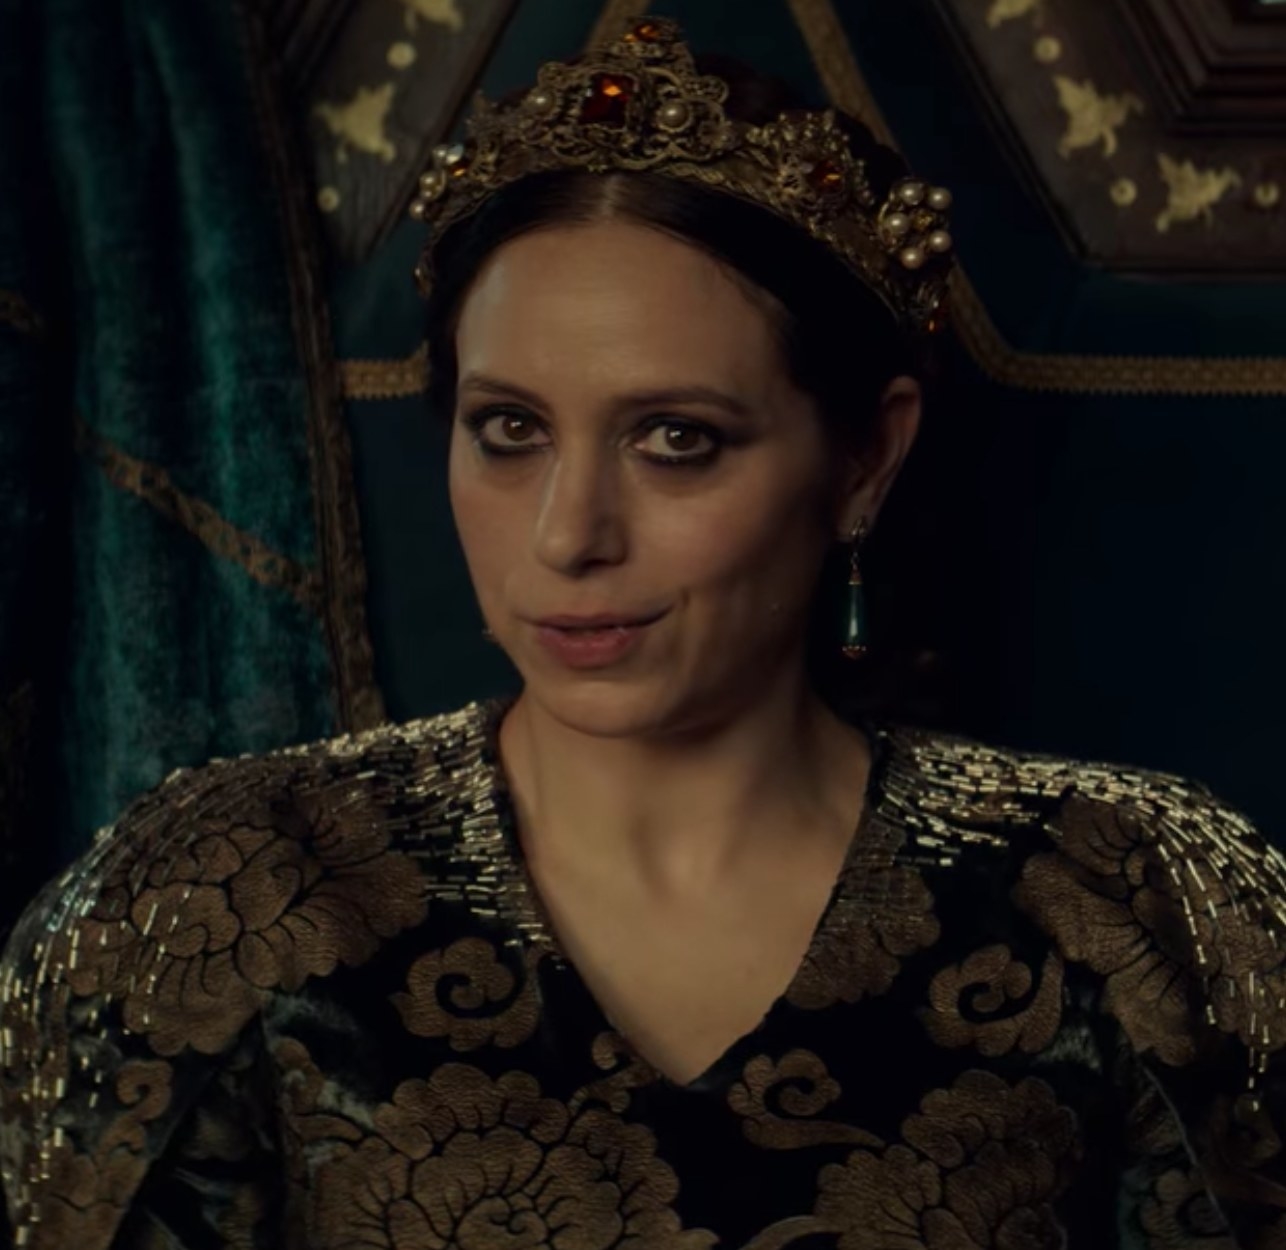 Jodhi May as Queen Calanthe speaks to Geralt while seated at a banquet feast in &quot;The Witcher&quot;